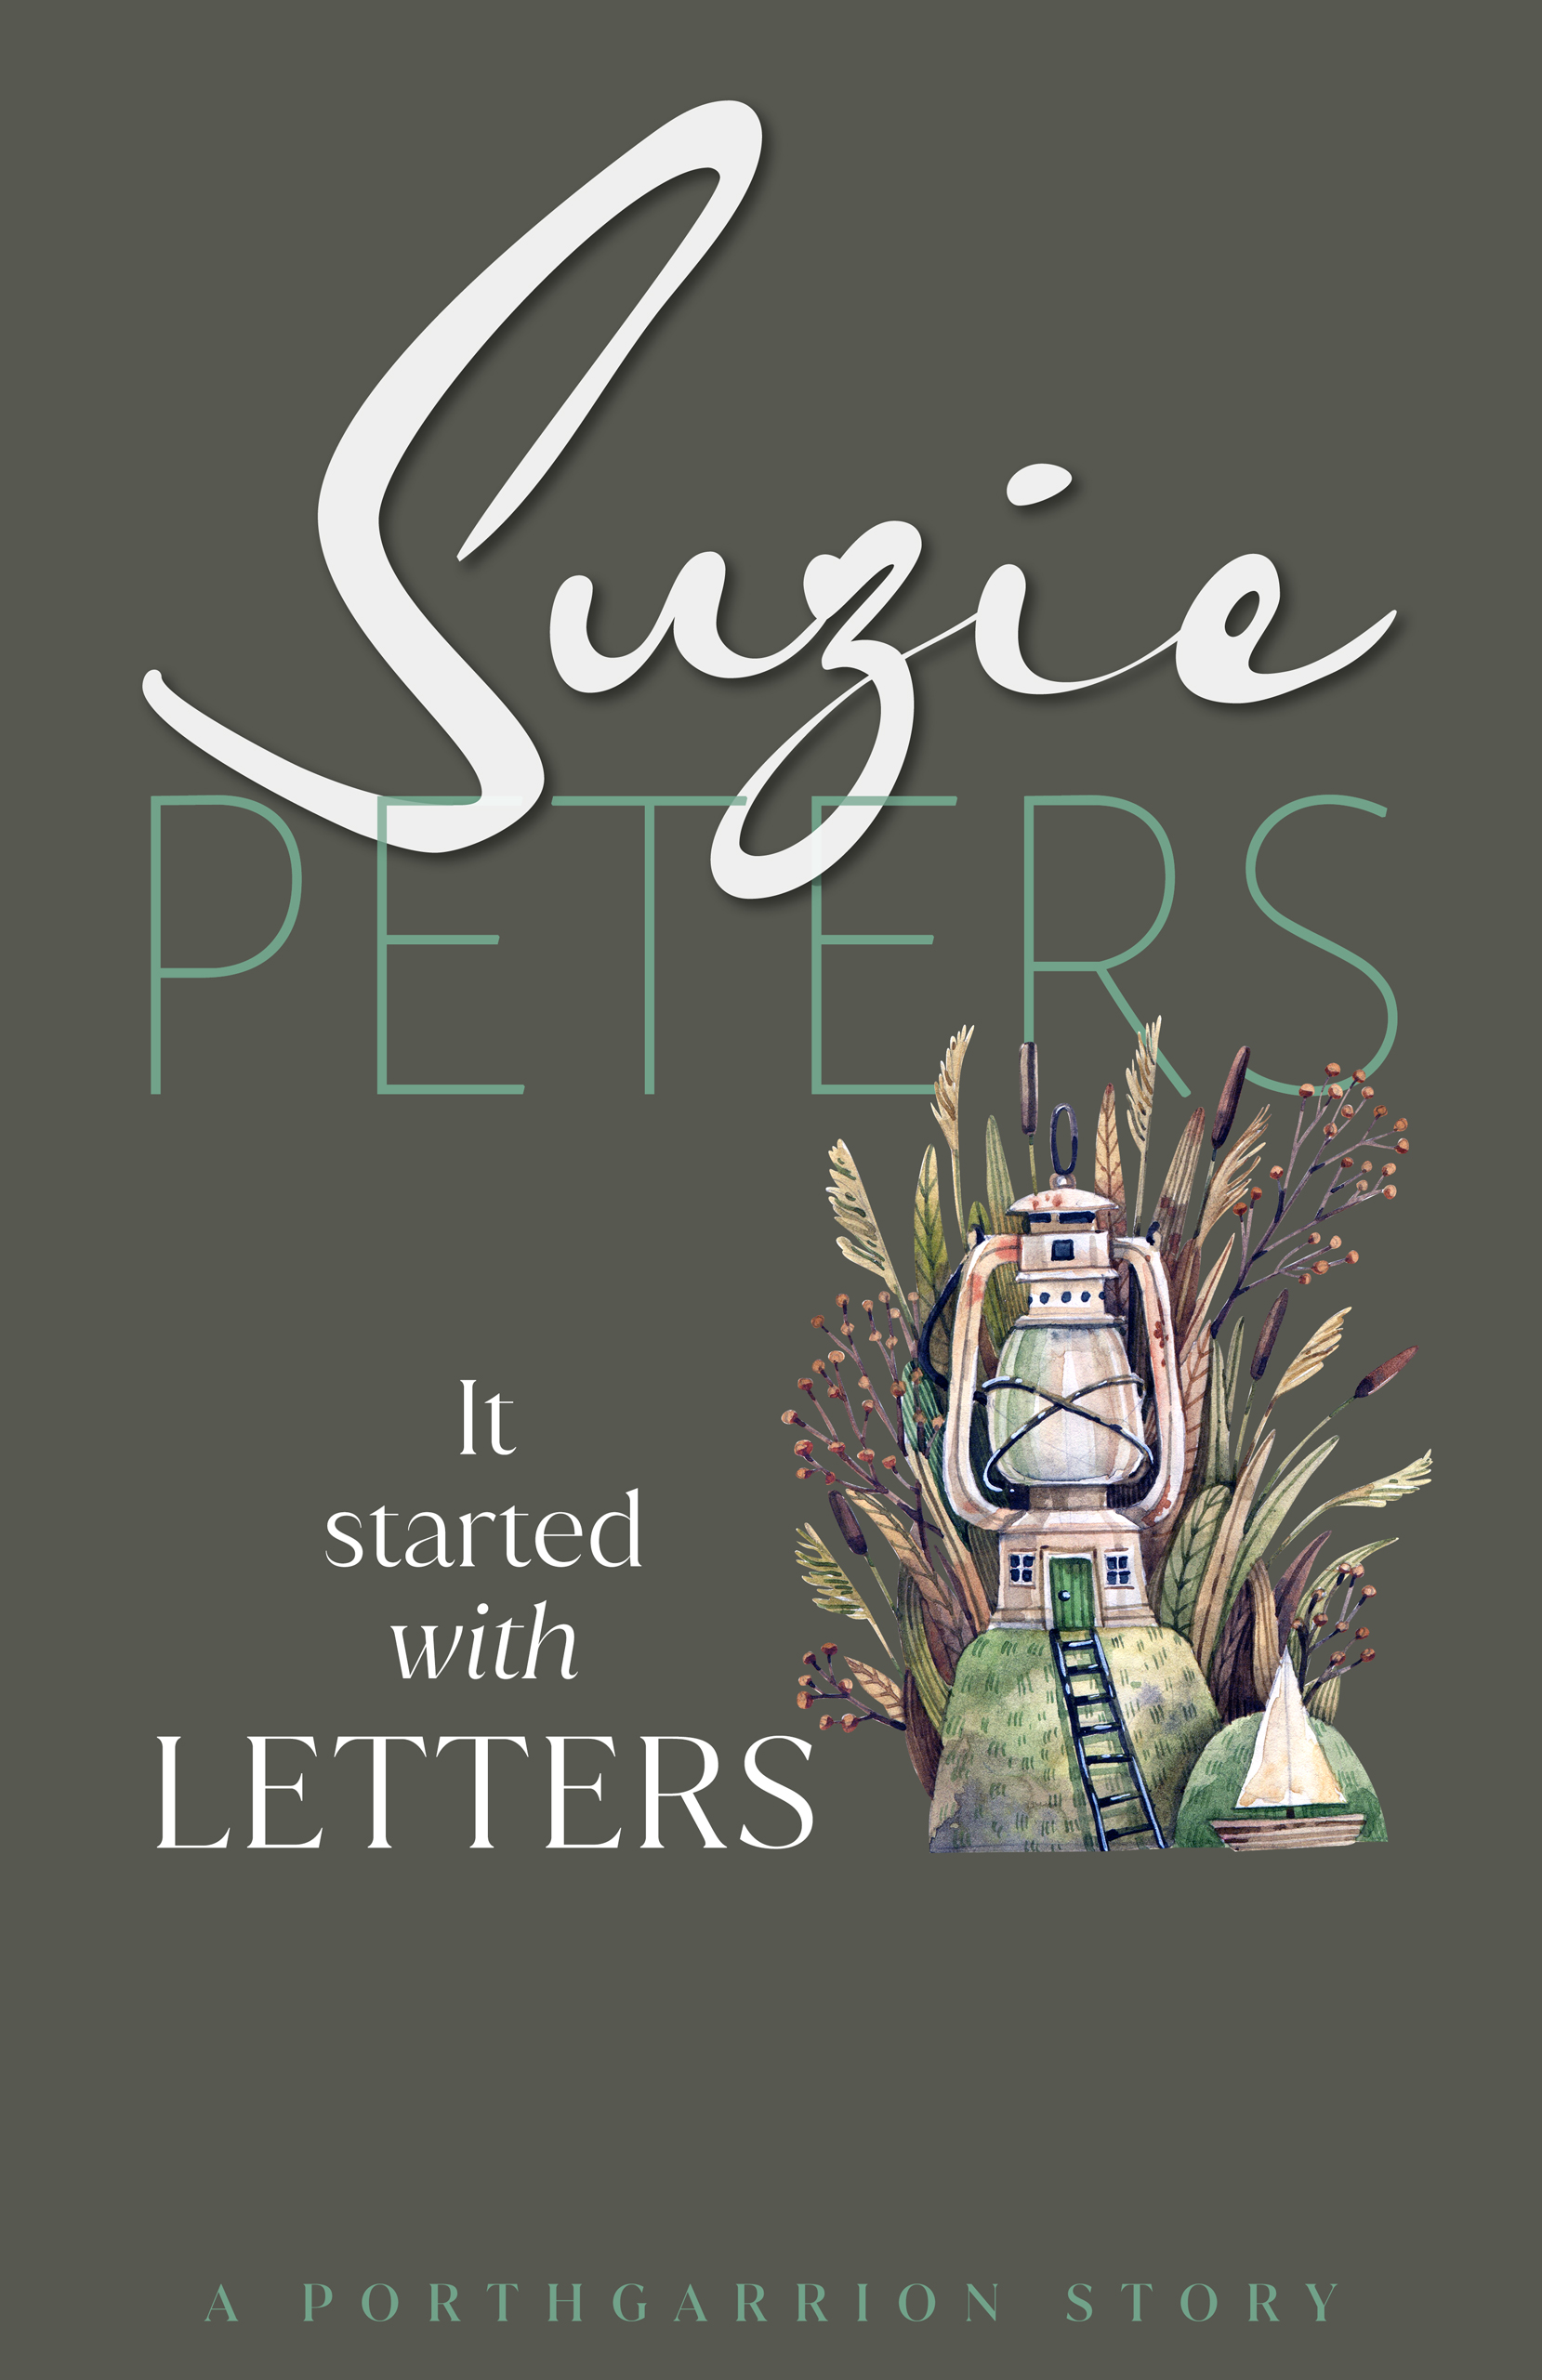 Porthgarrion Series: It Started with Letters by Suzie Peters.